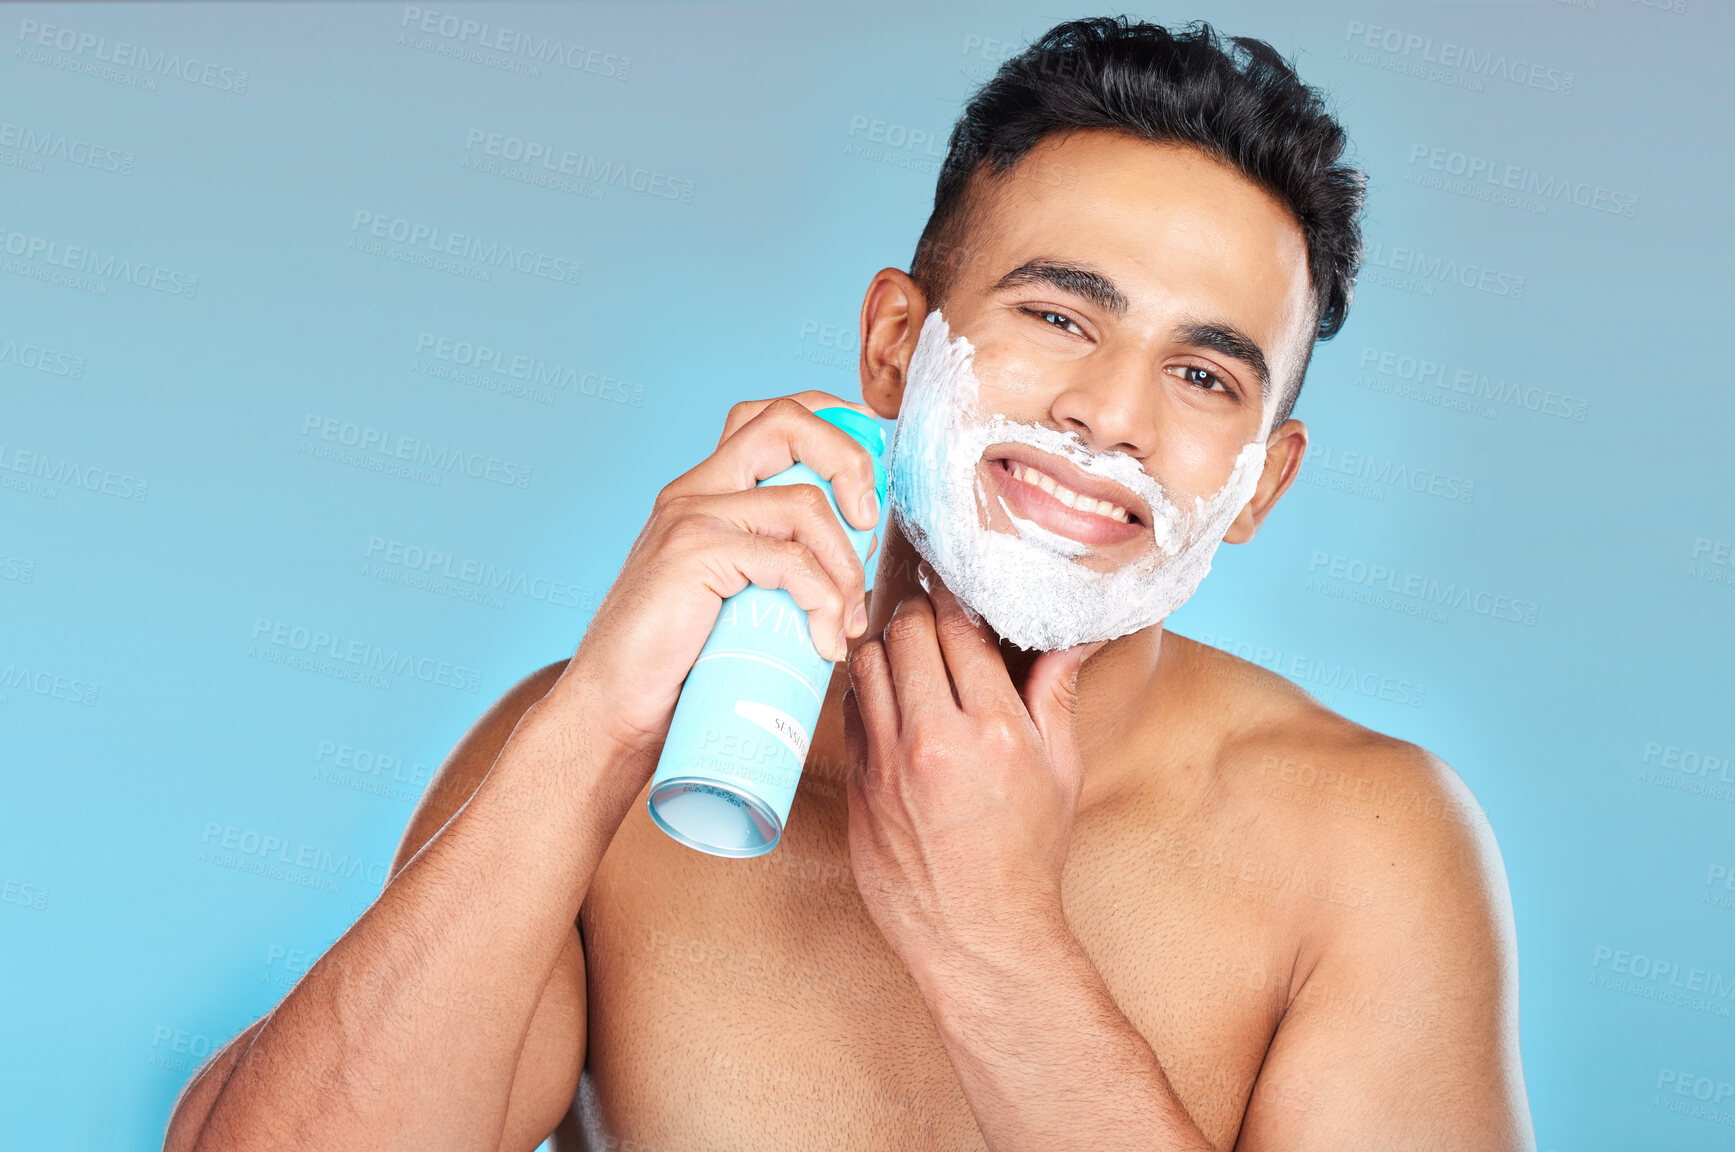 Buy stock photo Skincare, face and man with shaving cream in studio on a blue background. Portrait, hair care or happy male model from Brazil spraying shave gel product for beard grooming, facial cleaning or hygiene